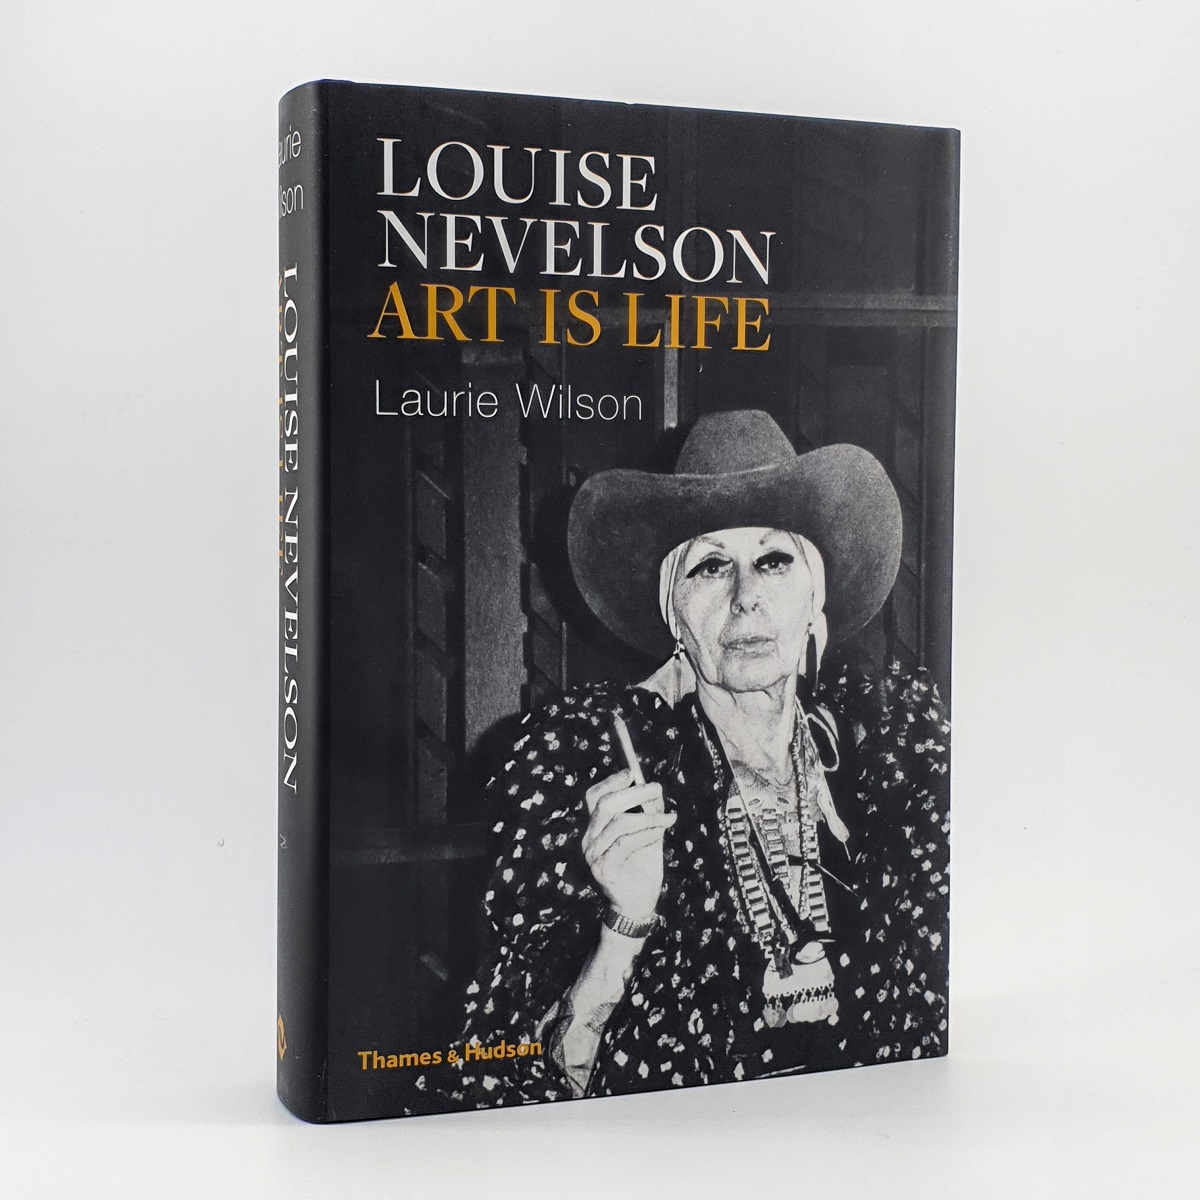 Louise Nevelson. Art is Life